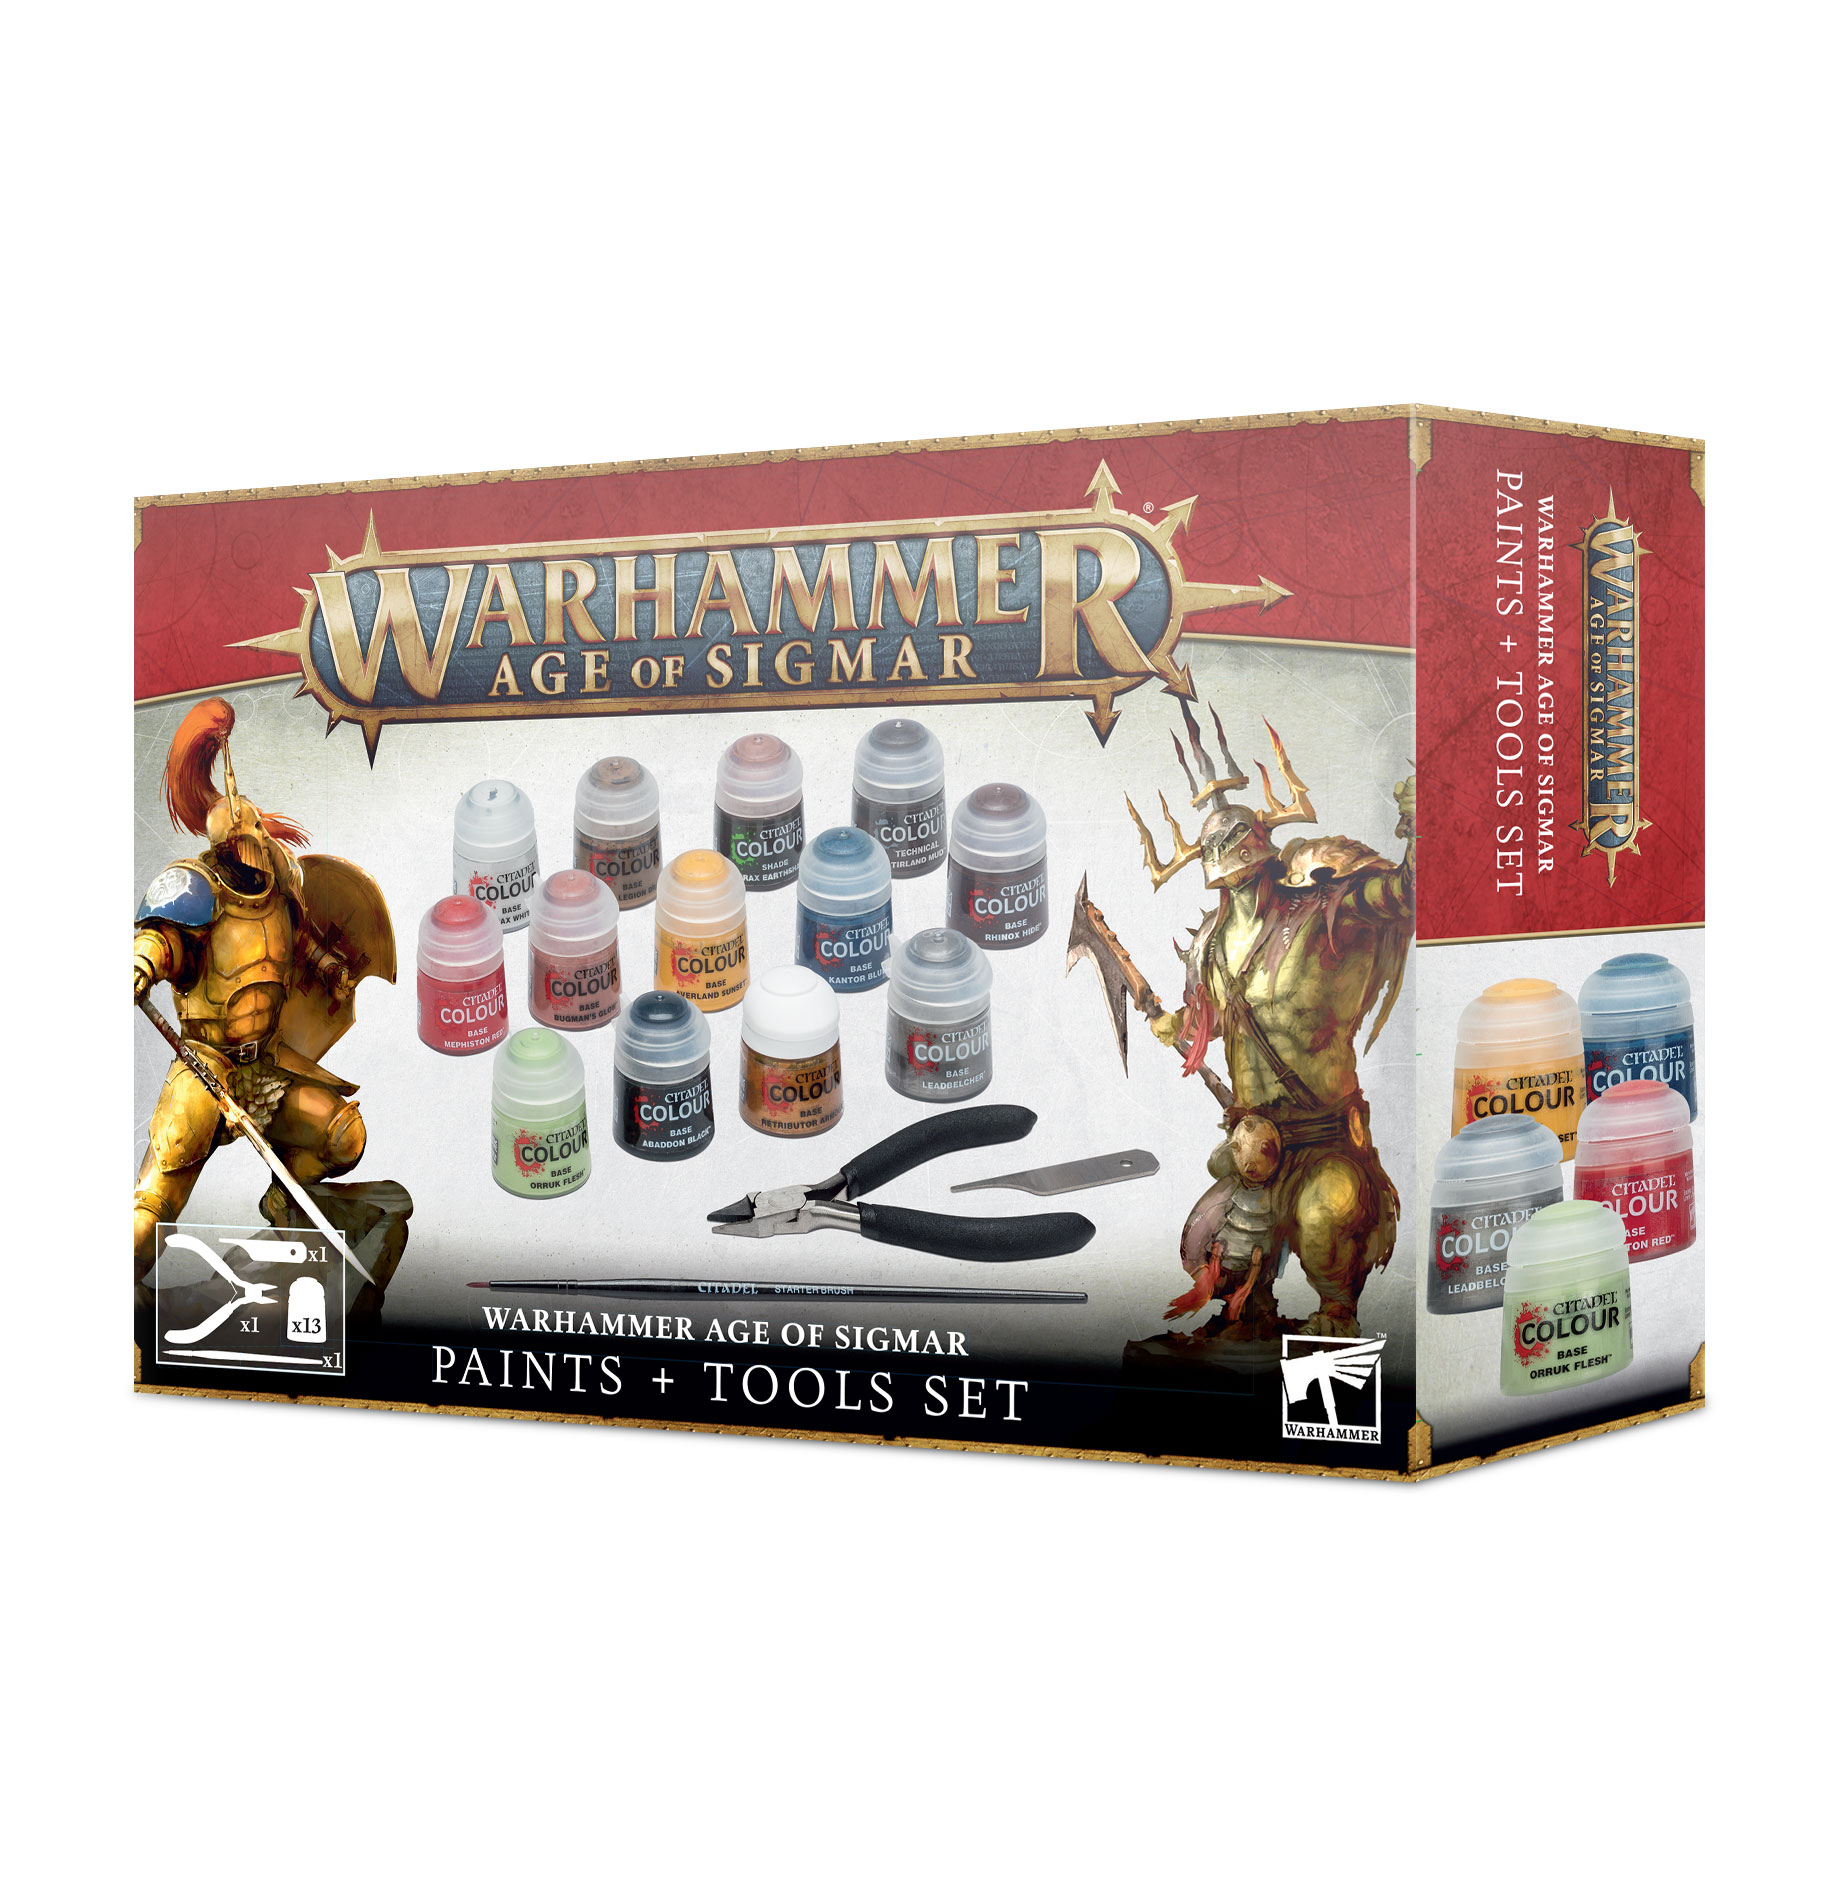 Paint + Tools Sets - 80-17 - Warhammer Age of Sigmar